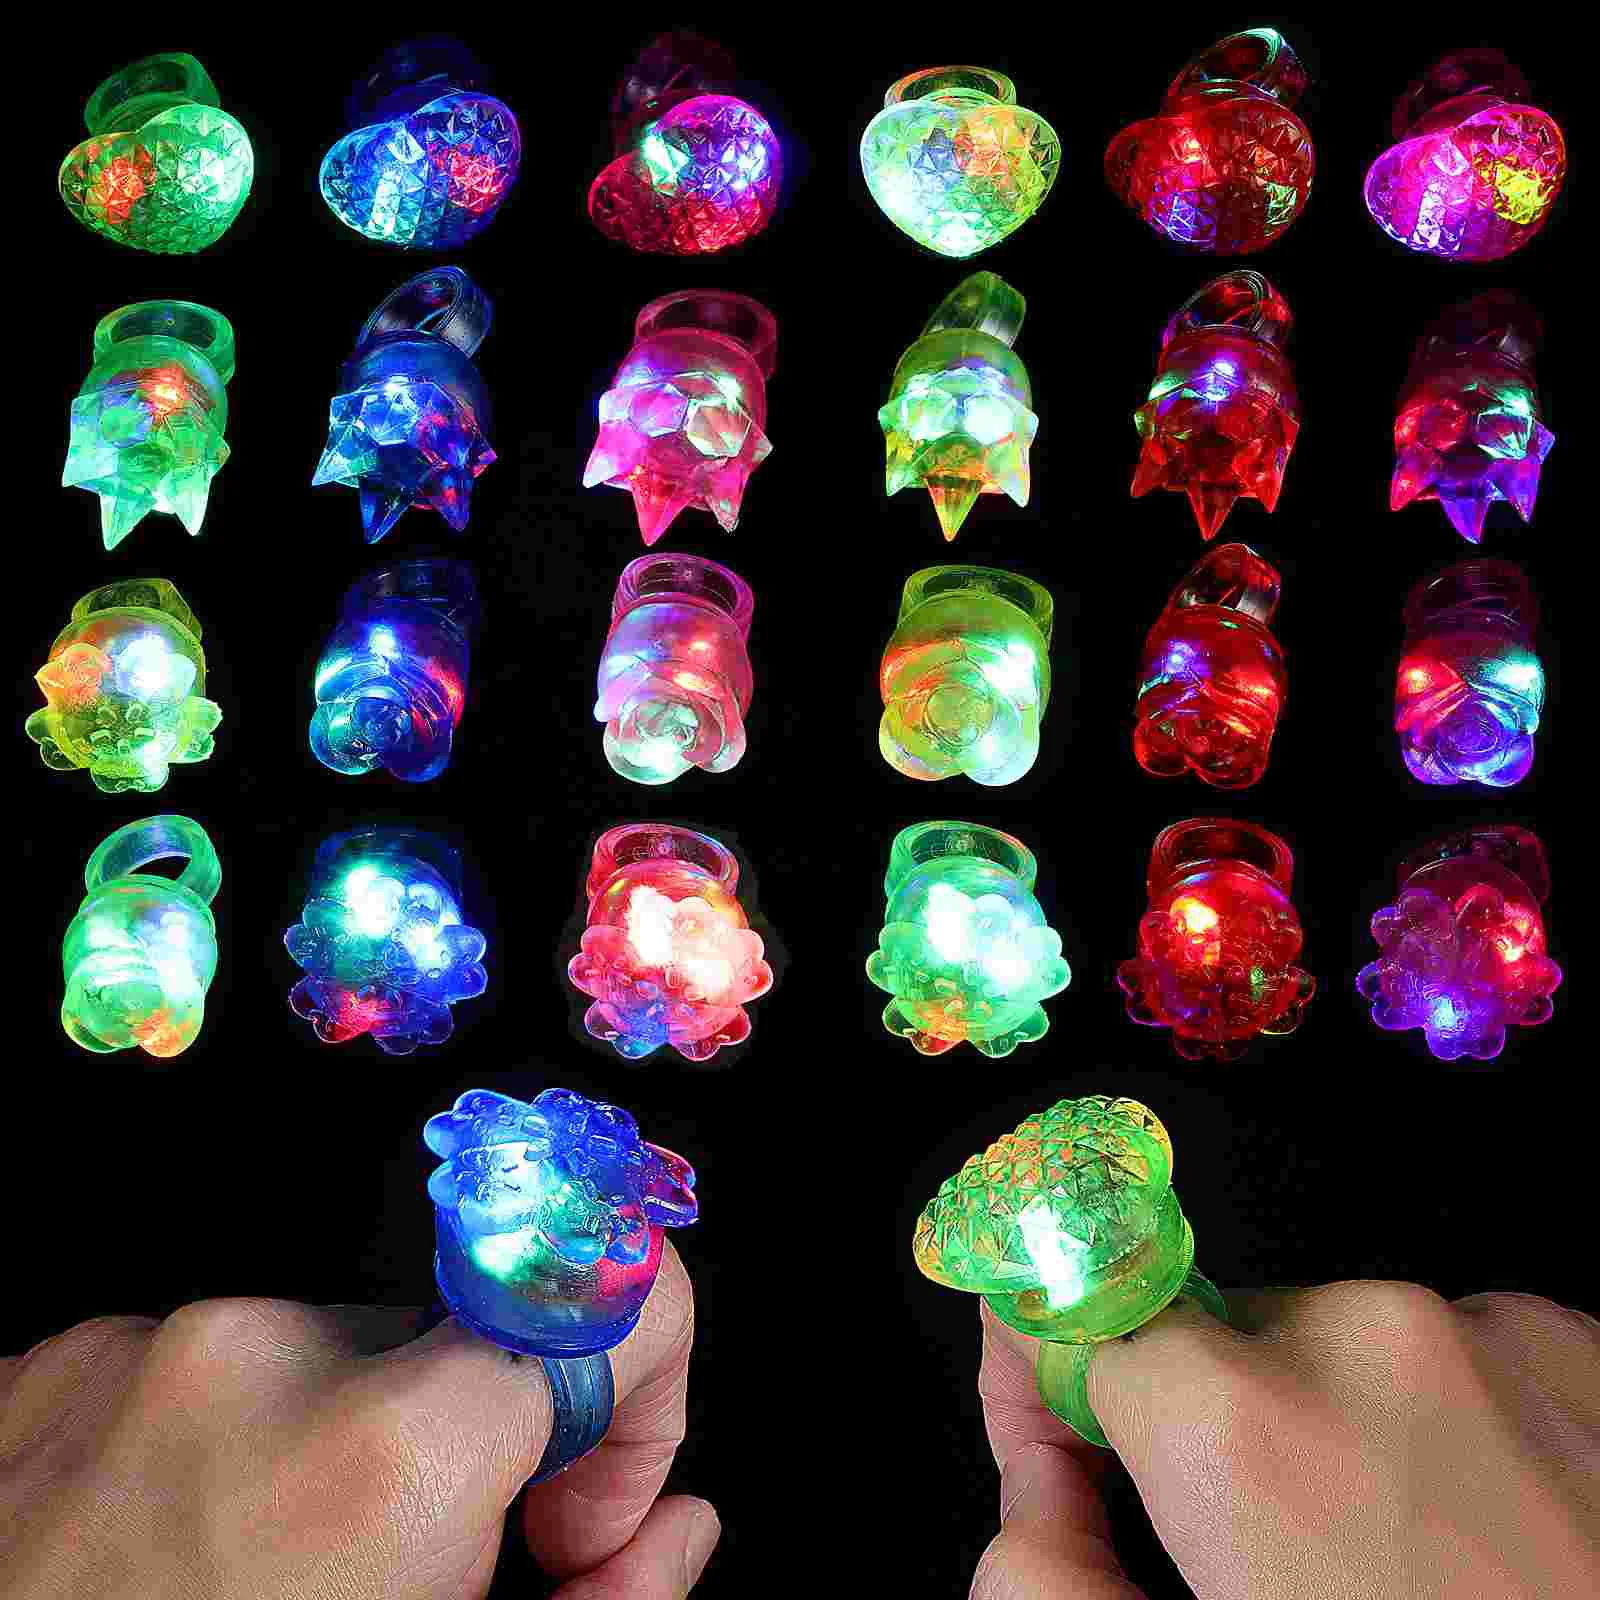 24 Pcs The Gift Ring Light up Rings Party Favor Halloween Jelly for Adult Glowing Child 24 pcs led finger rings love flower crown shape flashing rings jelly rings light up toys for raves parties